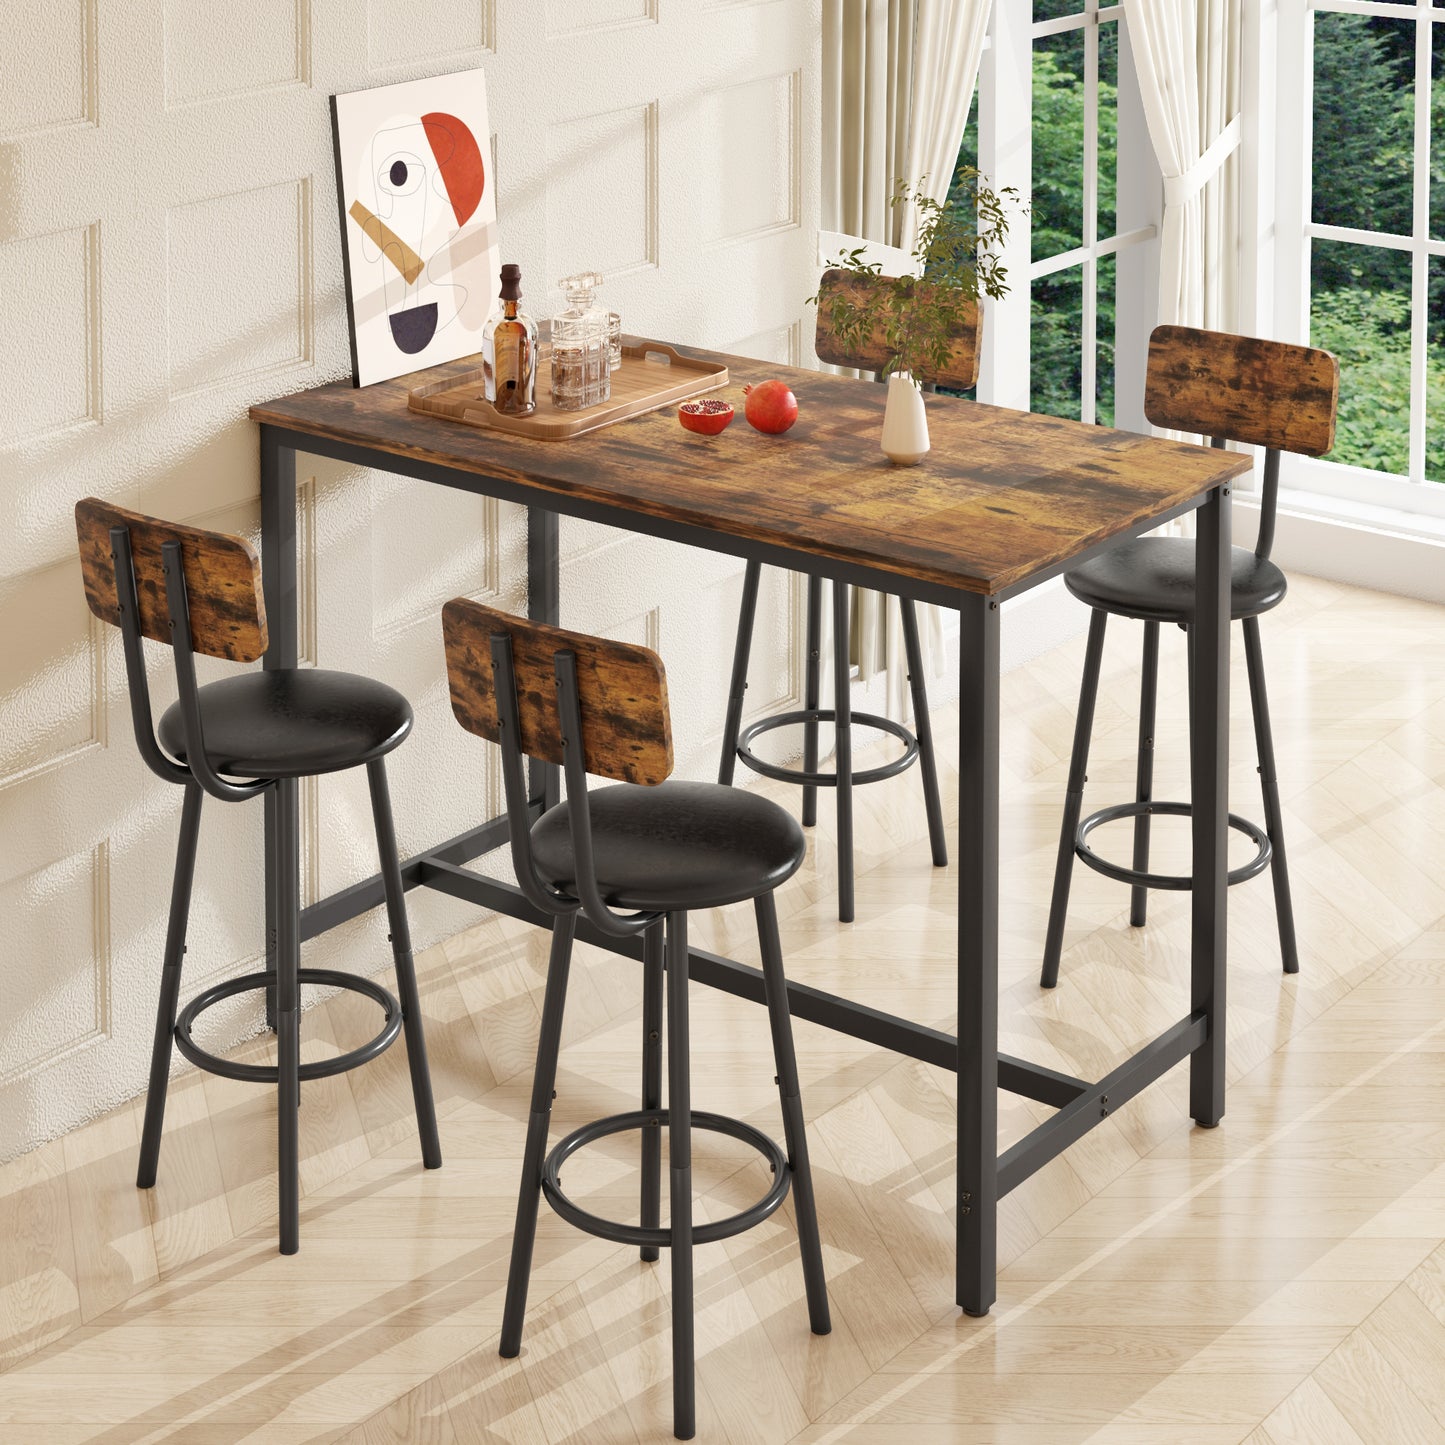 Modern Bar Table Set, SYNGAR Kitchen Table and Chairs for 4, 5 Piece Counter Height Dining Set with 4 Cushioned Stools, Extra Long Bistro Pub Table Set, Breakfast Dining Table Set, Rustic Brown